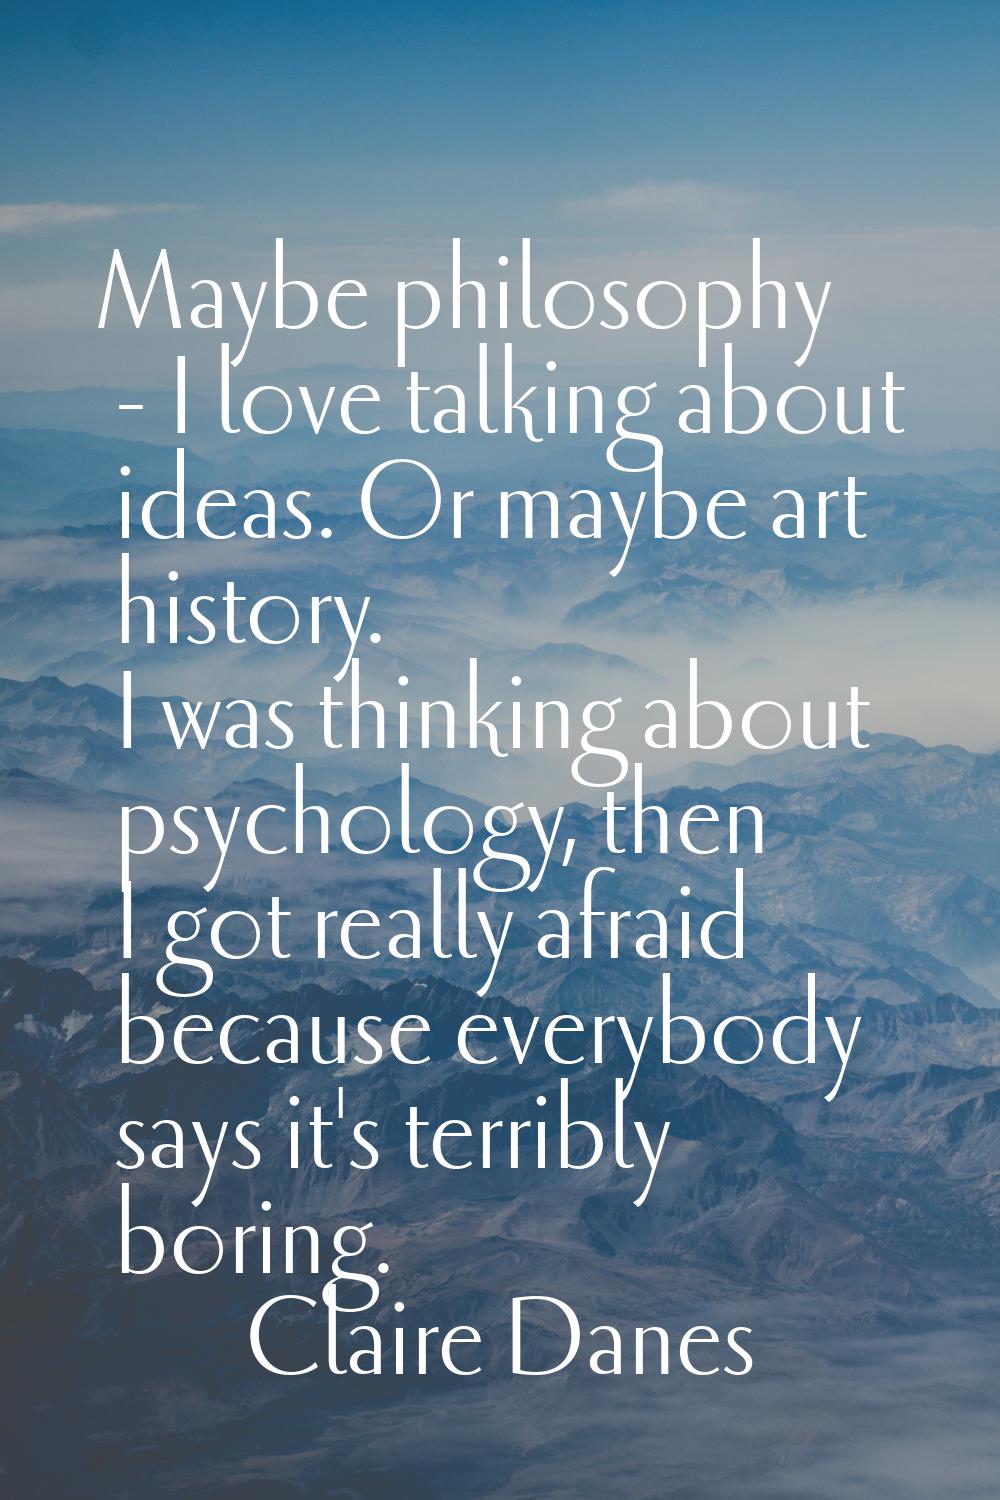 Maybe philosophy - I love talking about ideas. Or maybe art history. I was thinking about psycholog